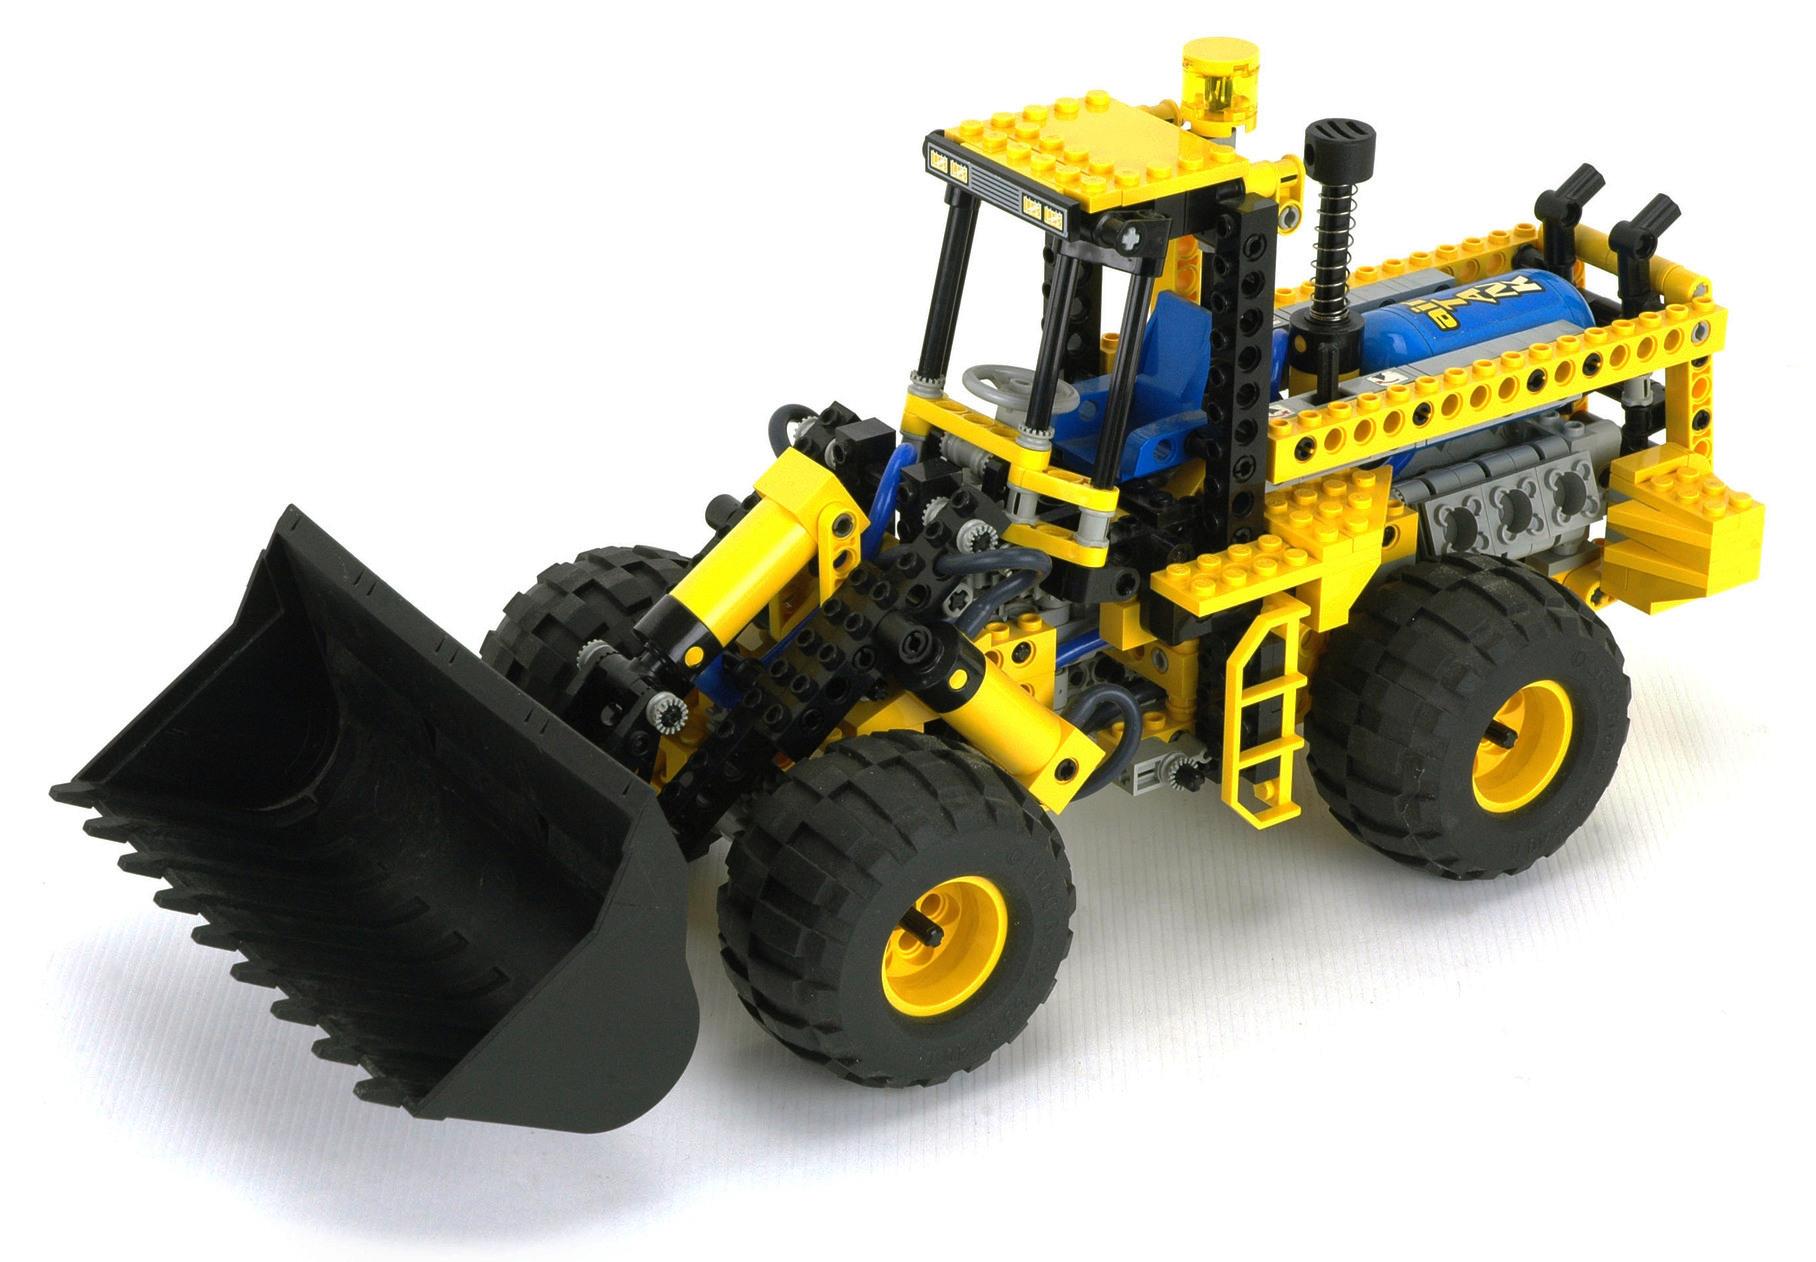 LEGO 8464 Technic Pneumatic Front-End Loader | BrickEconomy